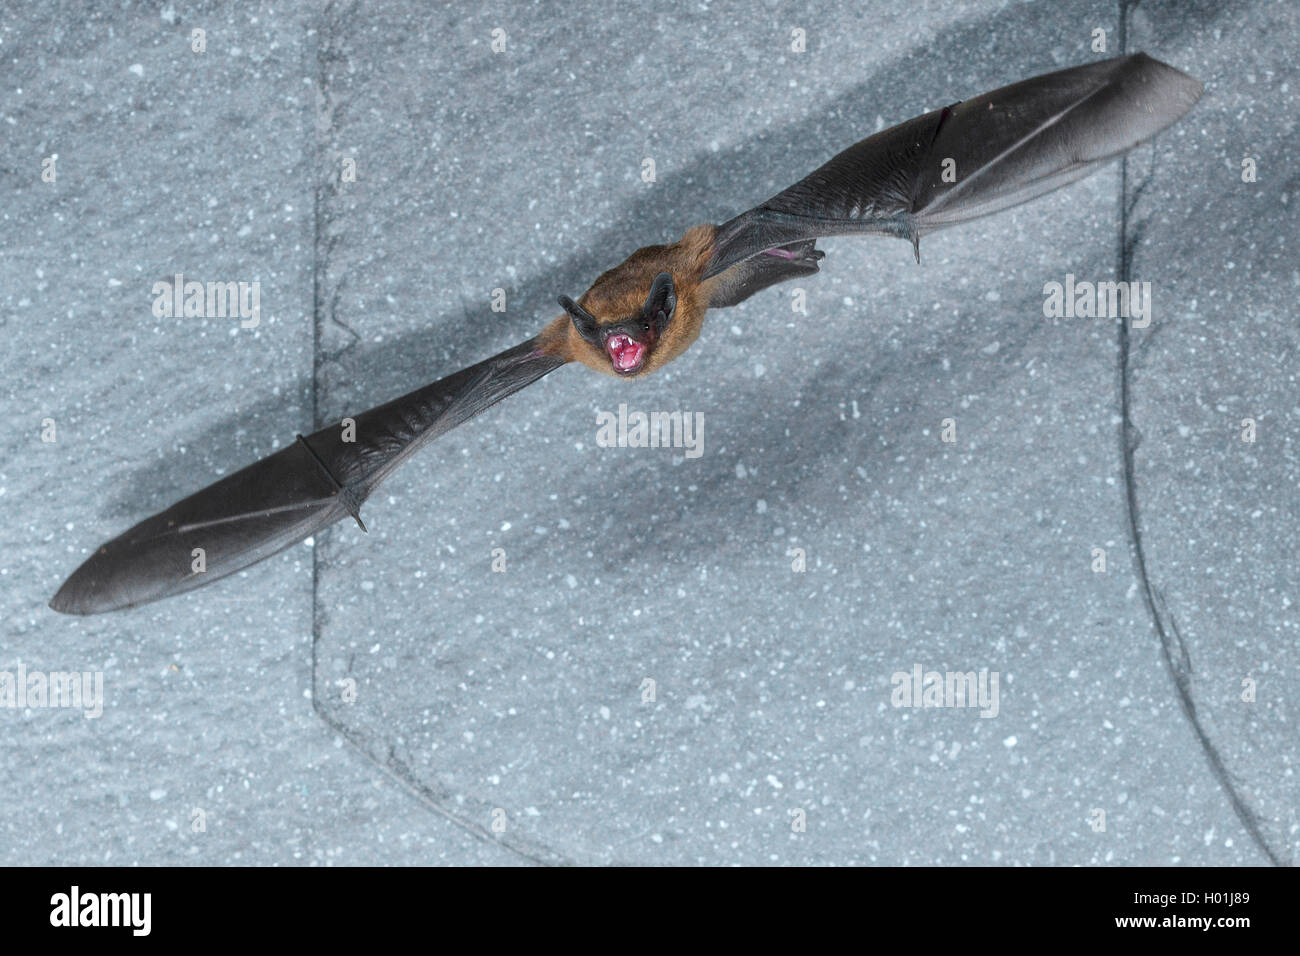 common pipistrelle (Pipistrellus pipistrellus), flying into the beginning darkness out of a slate cover, front view, Germany, North Rhine-Westphalia Stock Photo